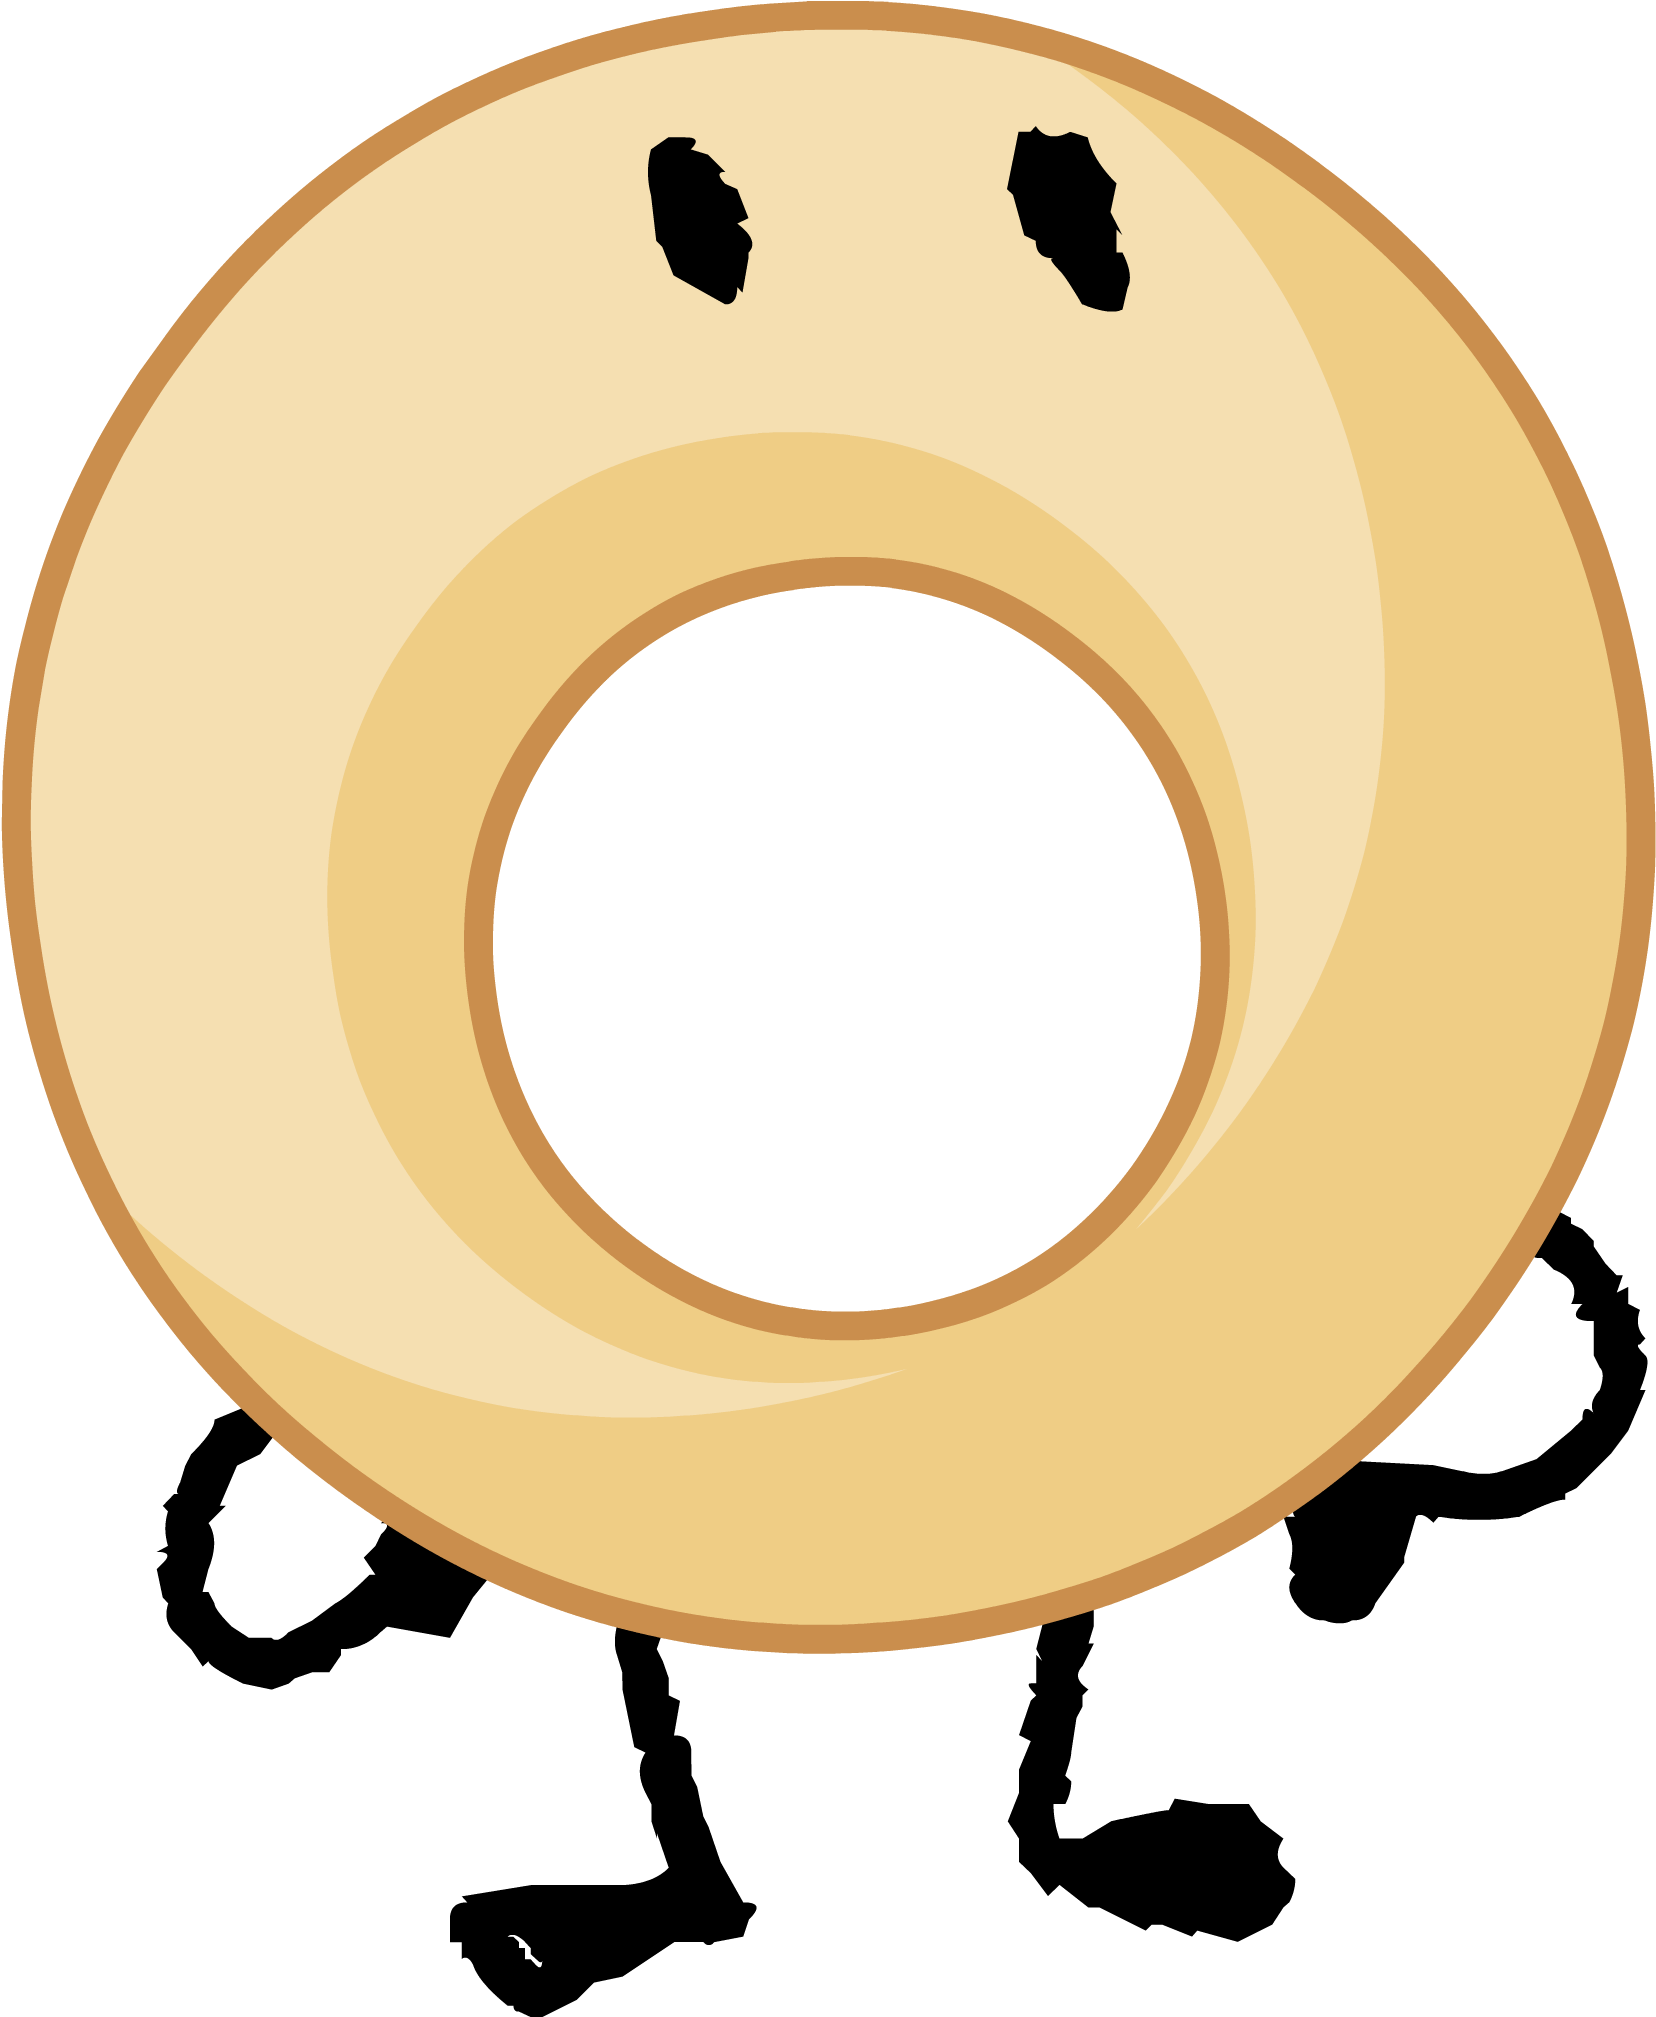 Donut Intro 2 - Battle For Bfdi Donut (1682x2073)